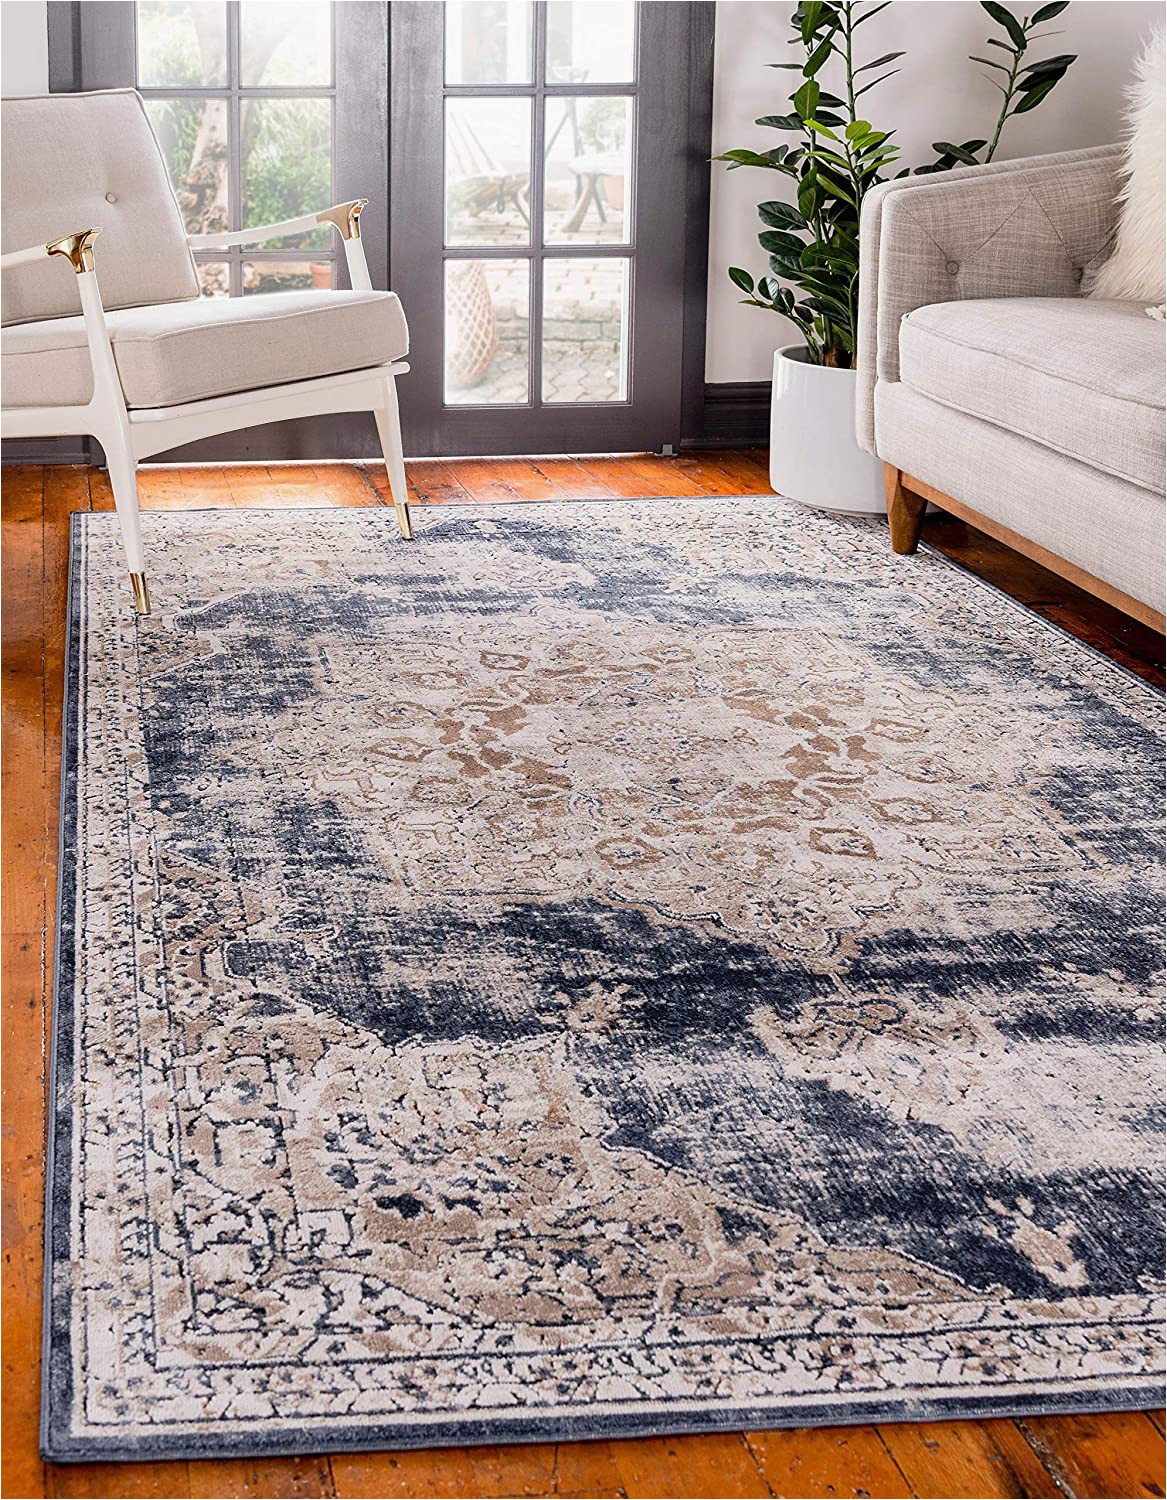 Navy Blue and Beige area Rugs Unique Loom Chateau Distressed Vintage Traditional Textured area Rug 4 0 X 6 0 Beige Navy Blue